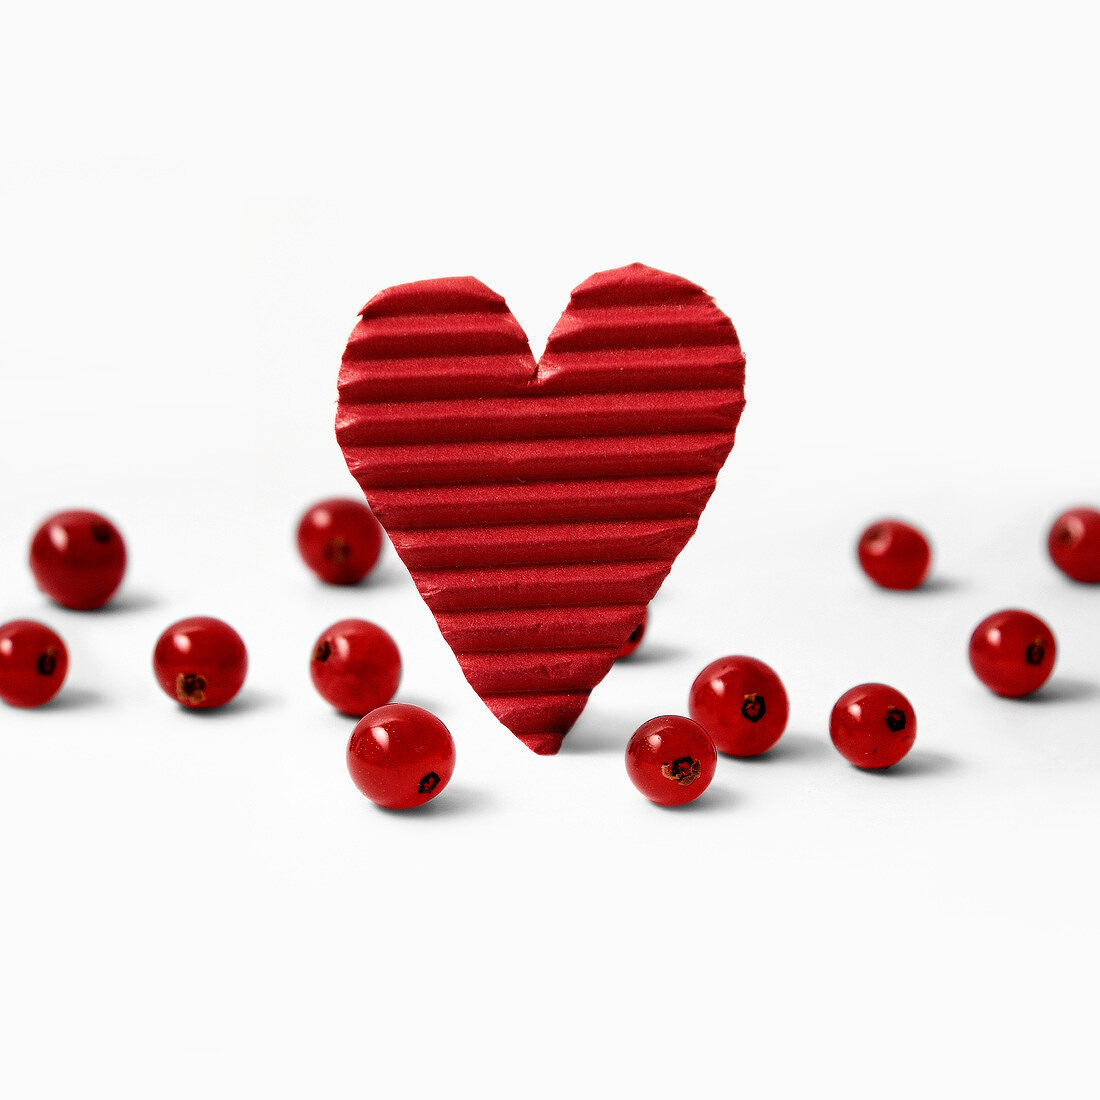 Red cardboard heart and redcurrants